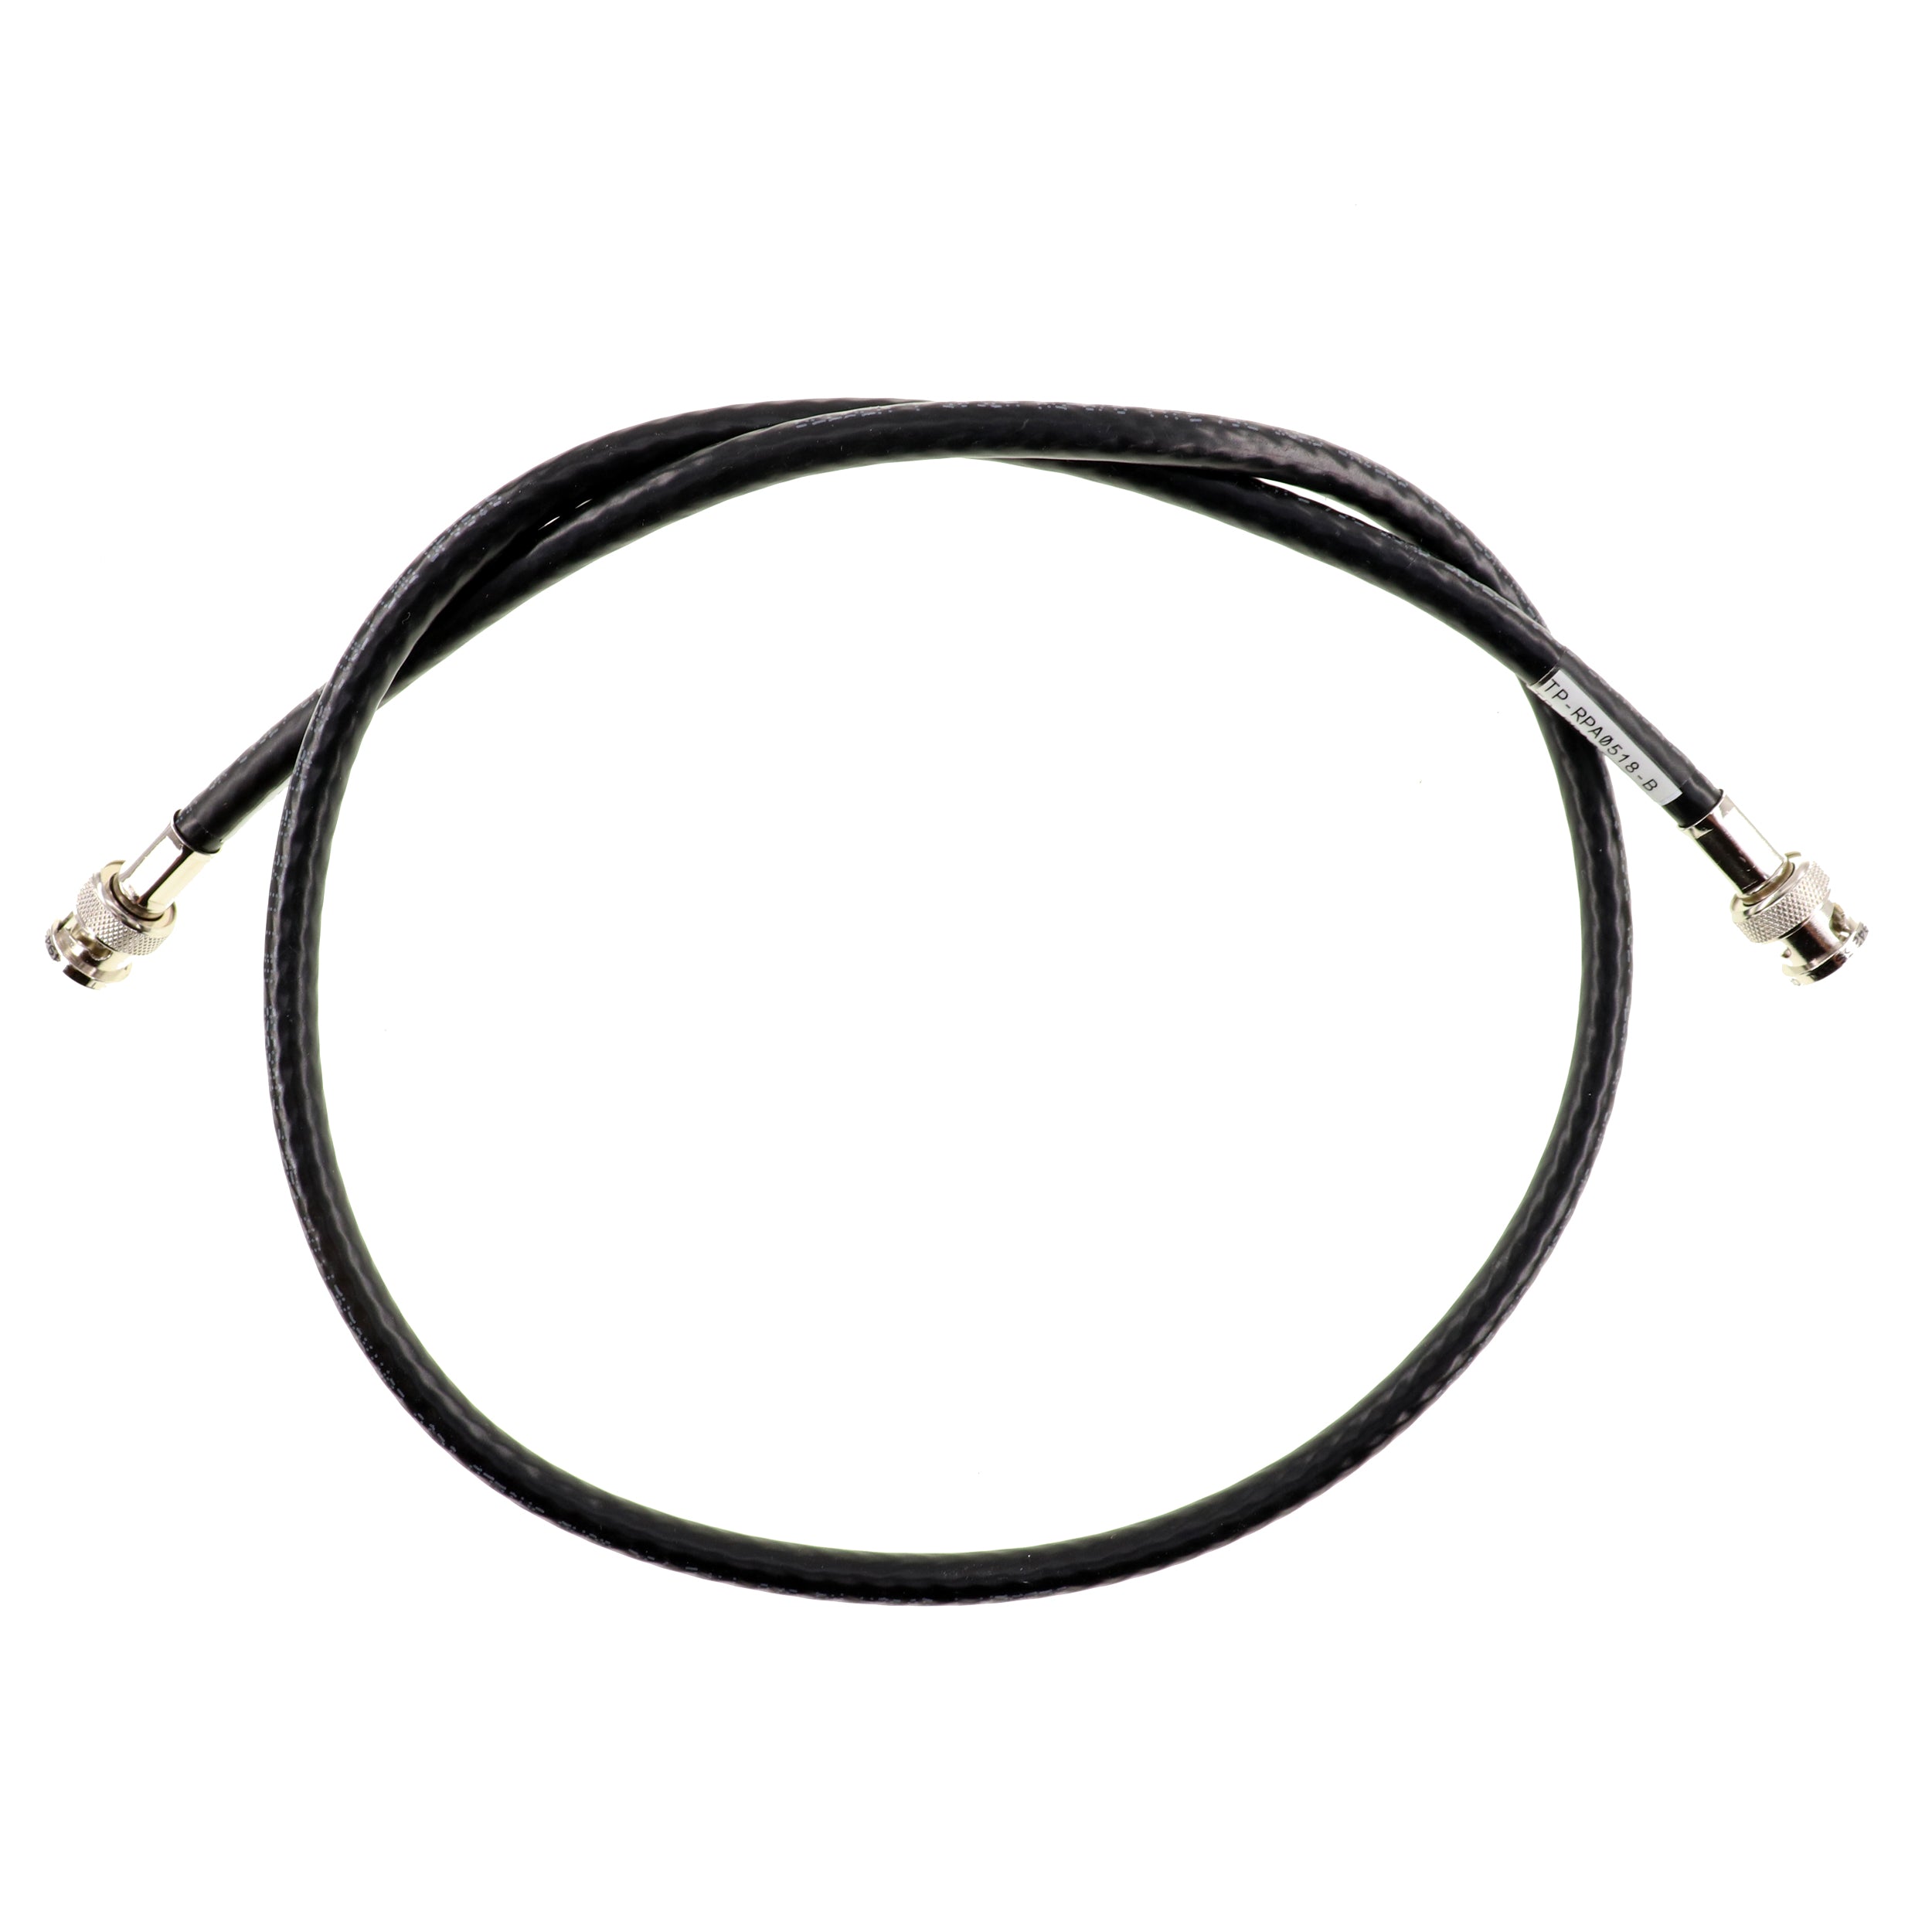 Cireneg, COAXIAL CABLE RG-6/U ASSEMBLY BELDEN 3092A WITH 1786-BNC/B CONNECTORS, 27-INCH